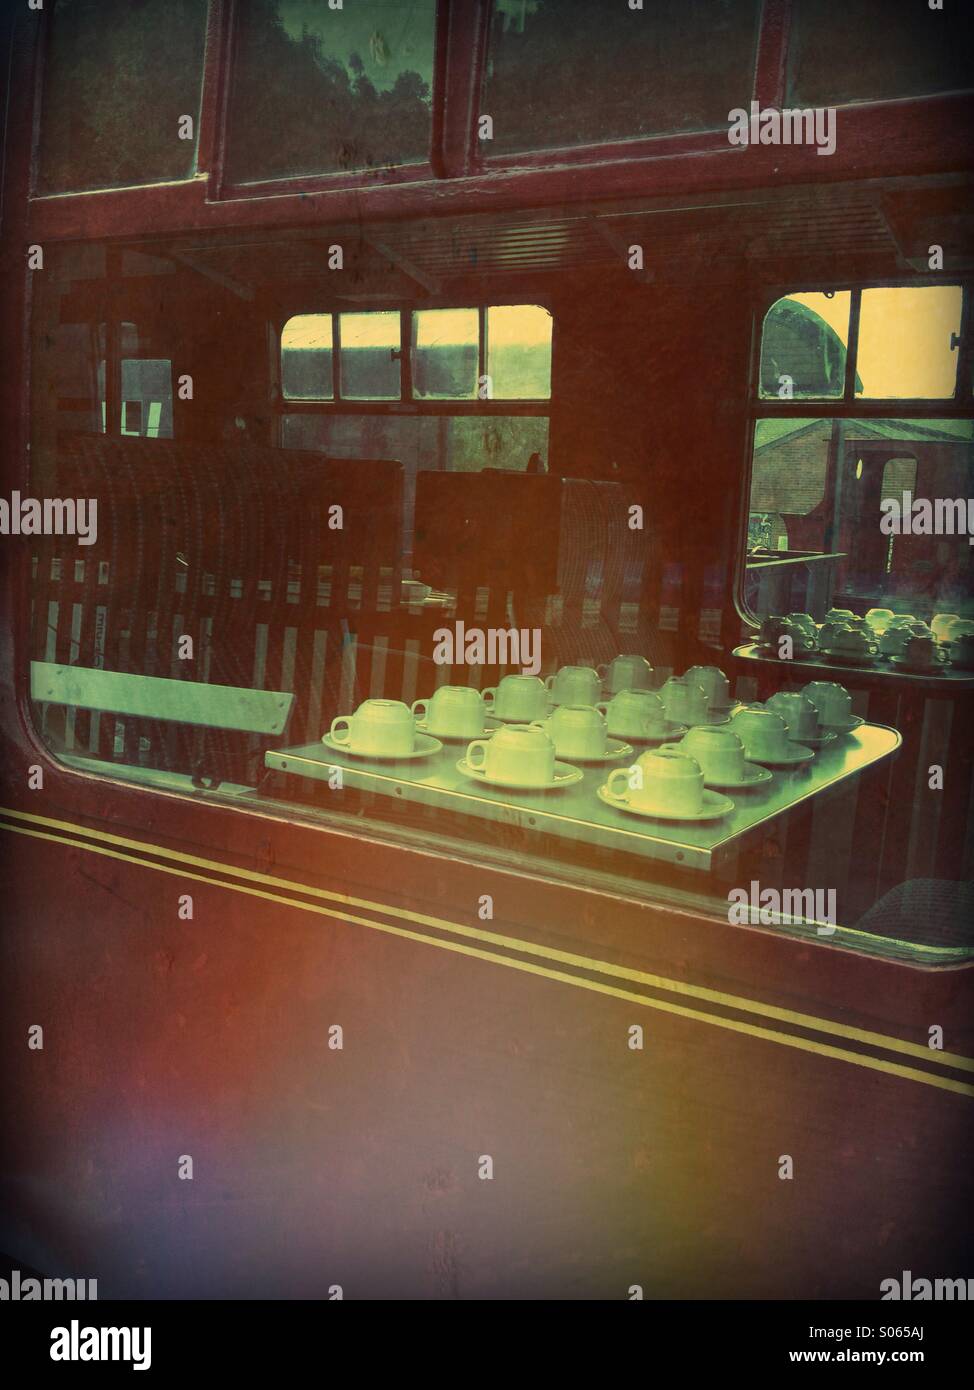 Cups and saucers set up in a vintage train carriage Stock Photo